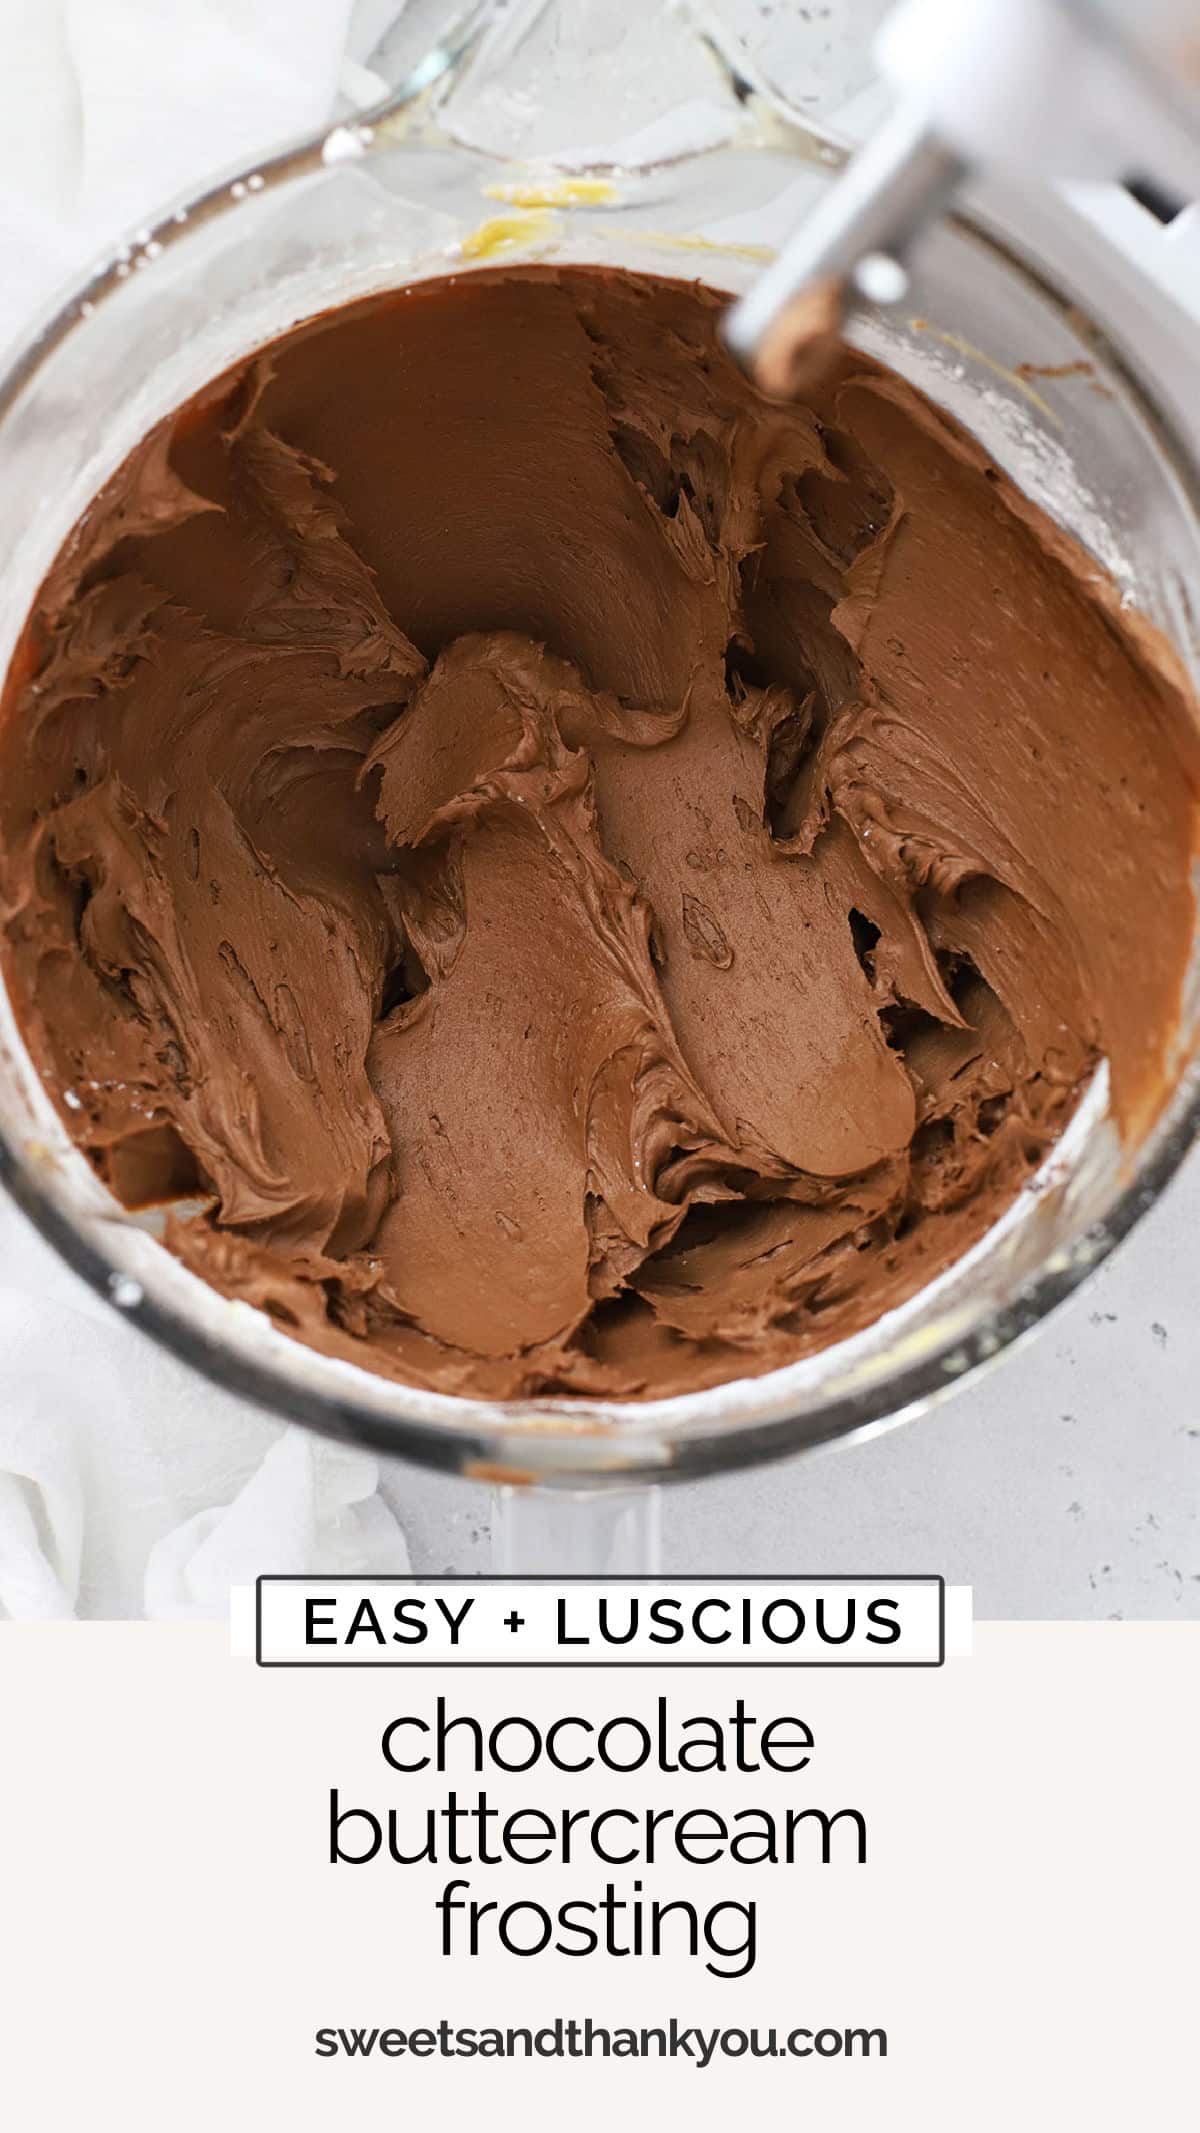 This easy homemade chocolate frosting recipe is the BEST when you want something simple and reliable. Our classic chocolate buttercream works beautifully for piping decorations, or simply frosting your favorite cake! / plush chocolate frosting / easy chocolate frosting recipe / basic chocolate buttercream / american chocolate buttercream / chocolate frosting for cake / chocolate frosting for yellow cake / chocolate frosting for chocolate cake / gluten free chocolate frosting recipe